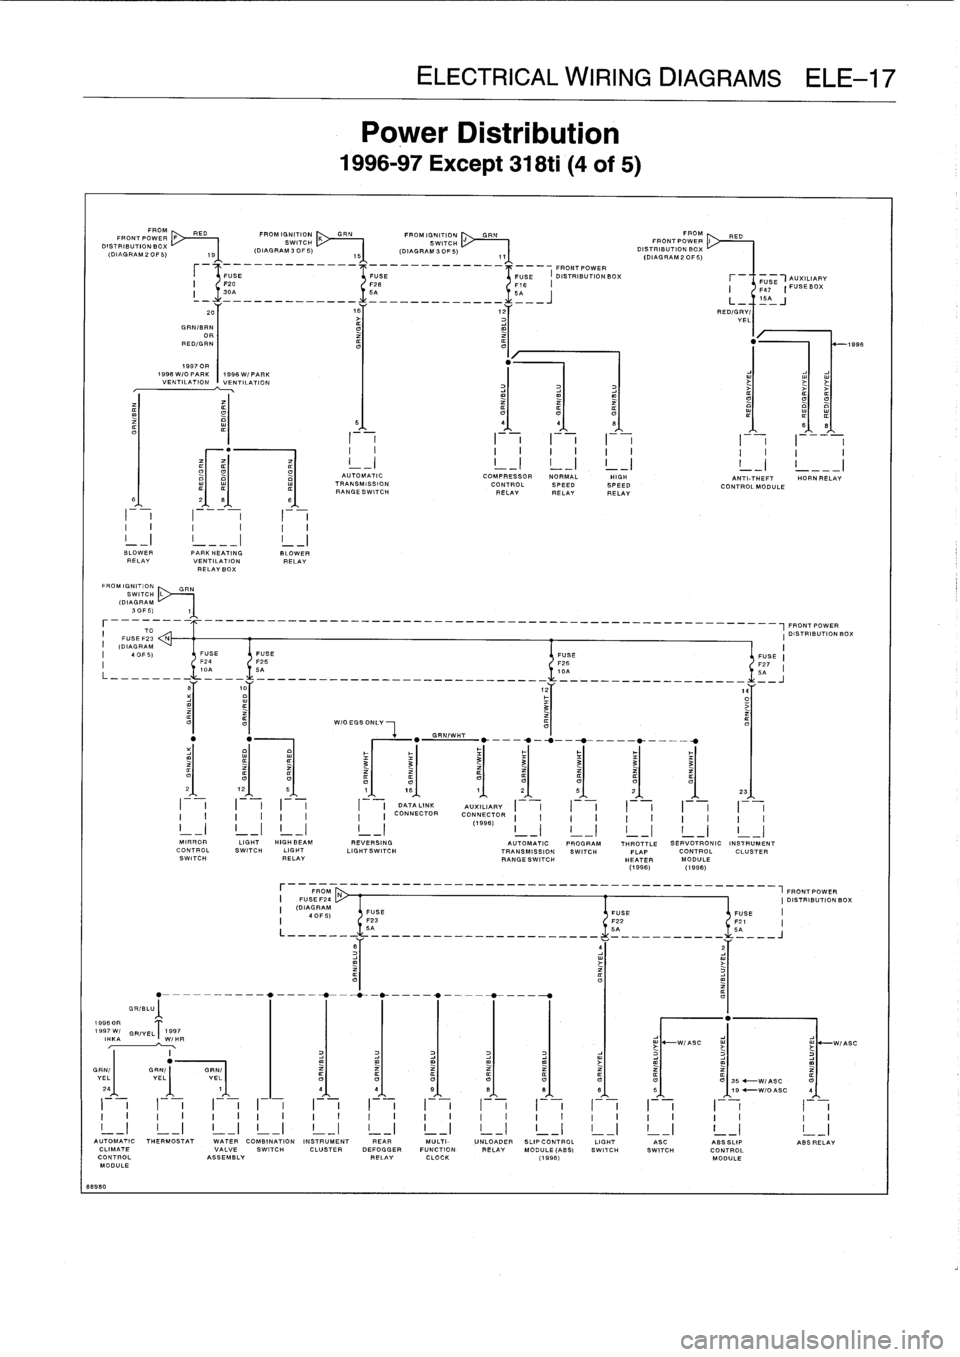 BMW 318i 1997 E36 Service Manual 
88989

FROM1~
RED
FRONT
P
.
DISTRIBUTIONBO
I/
X
(DIAGRAM
2
OF
5)
B

I

	

I

	

I

	

I
I

	

I

	

I

	

I

	

I

	

I
L
-1
BLOWER

	

PARK
HEATING

	

BLOWER
RELAY
VENTILATION
RELAYRELAY
BOX
FROM
I